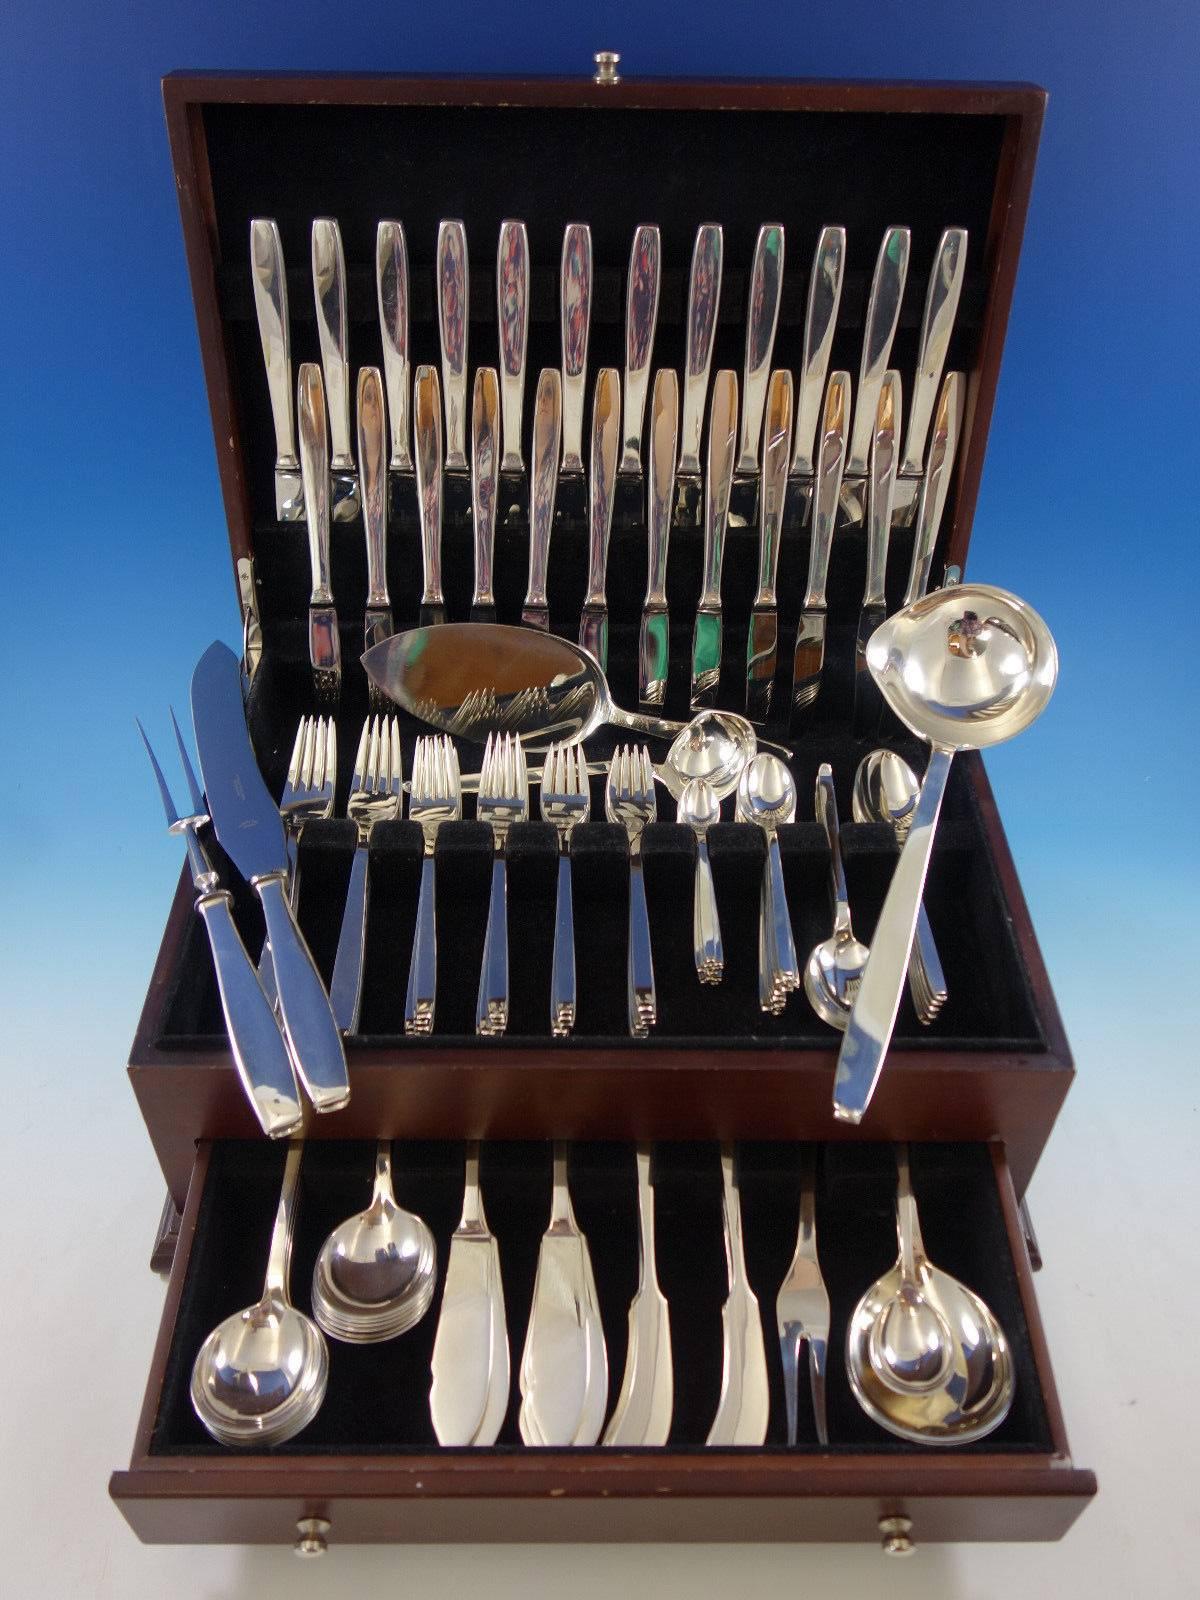 Funkis AKA pattern #29 by Evald Nielsen Danish sterling silver moderne flatware set, 140 pieces. This set includes: 

12 dinner knives, 8 3/8